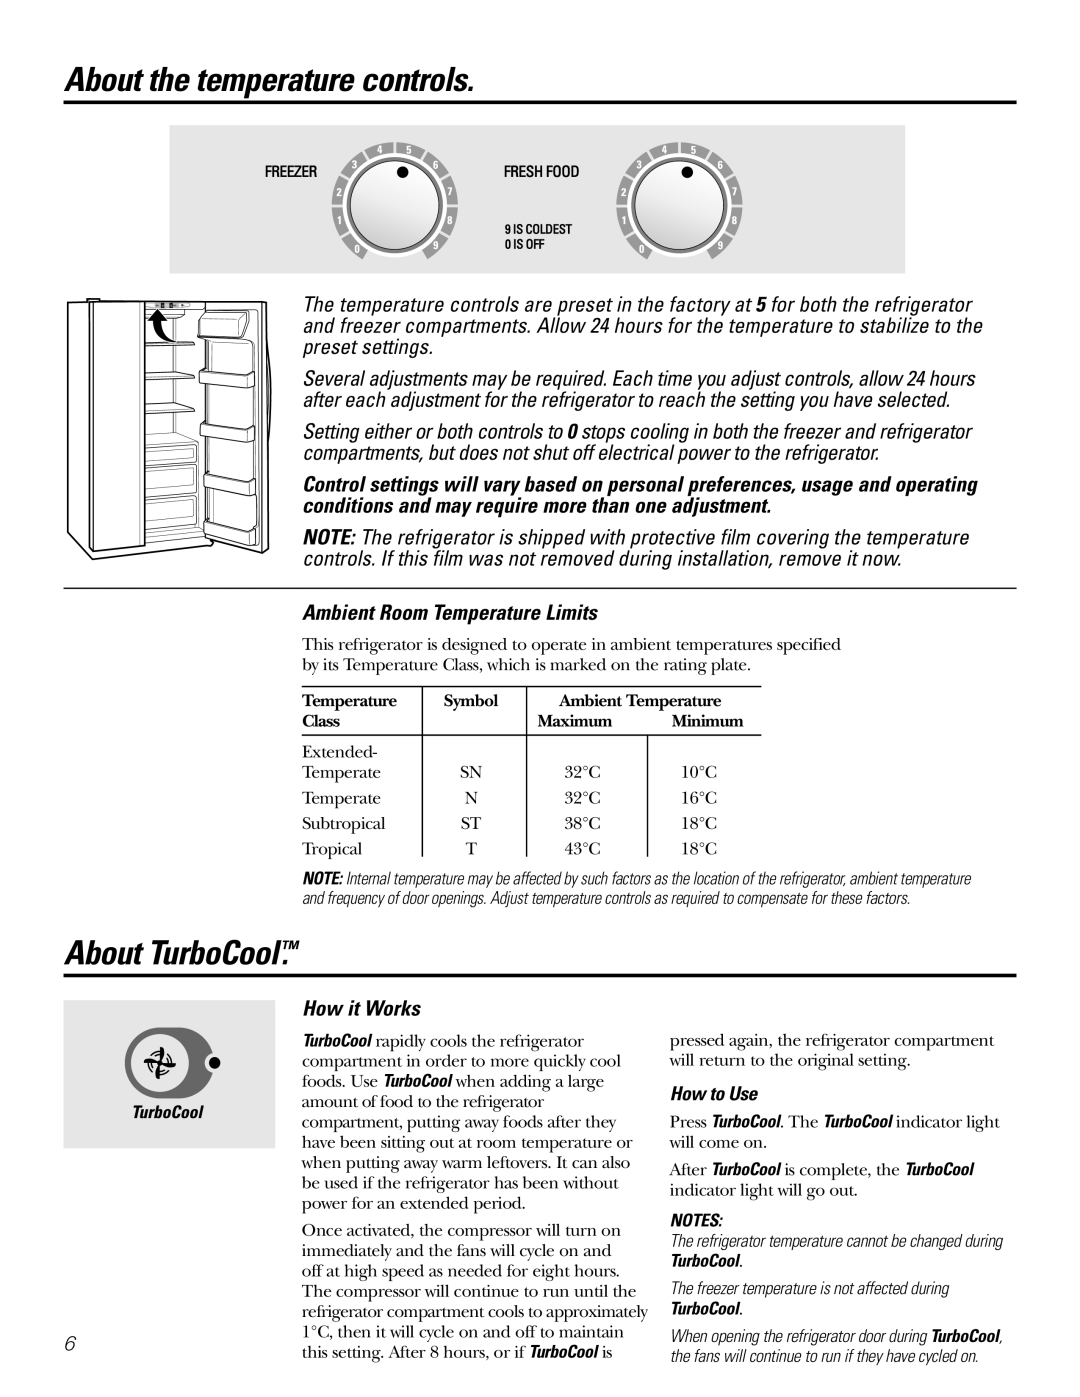 Hotpoint 23 About TurboCool, How it Works, About the temperature controls, Ambient Room Temperature Limits, How to Use 